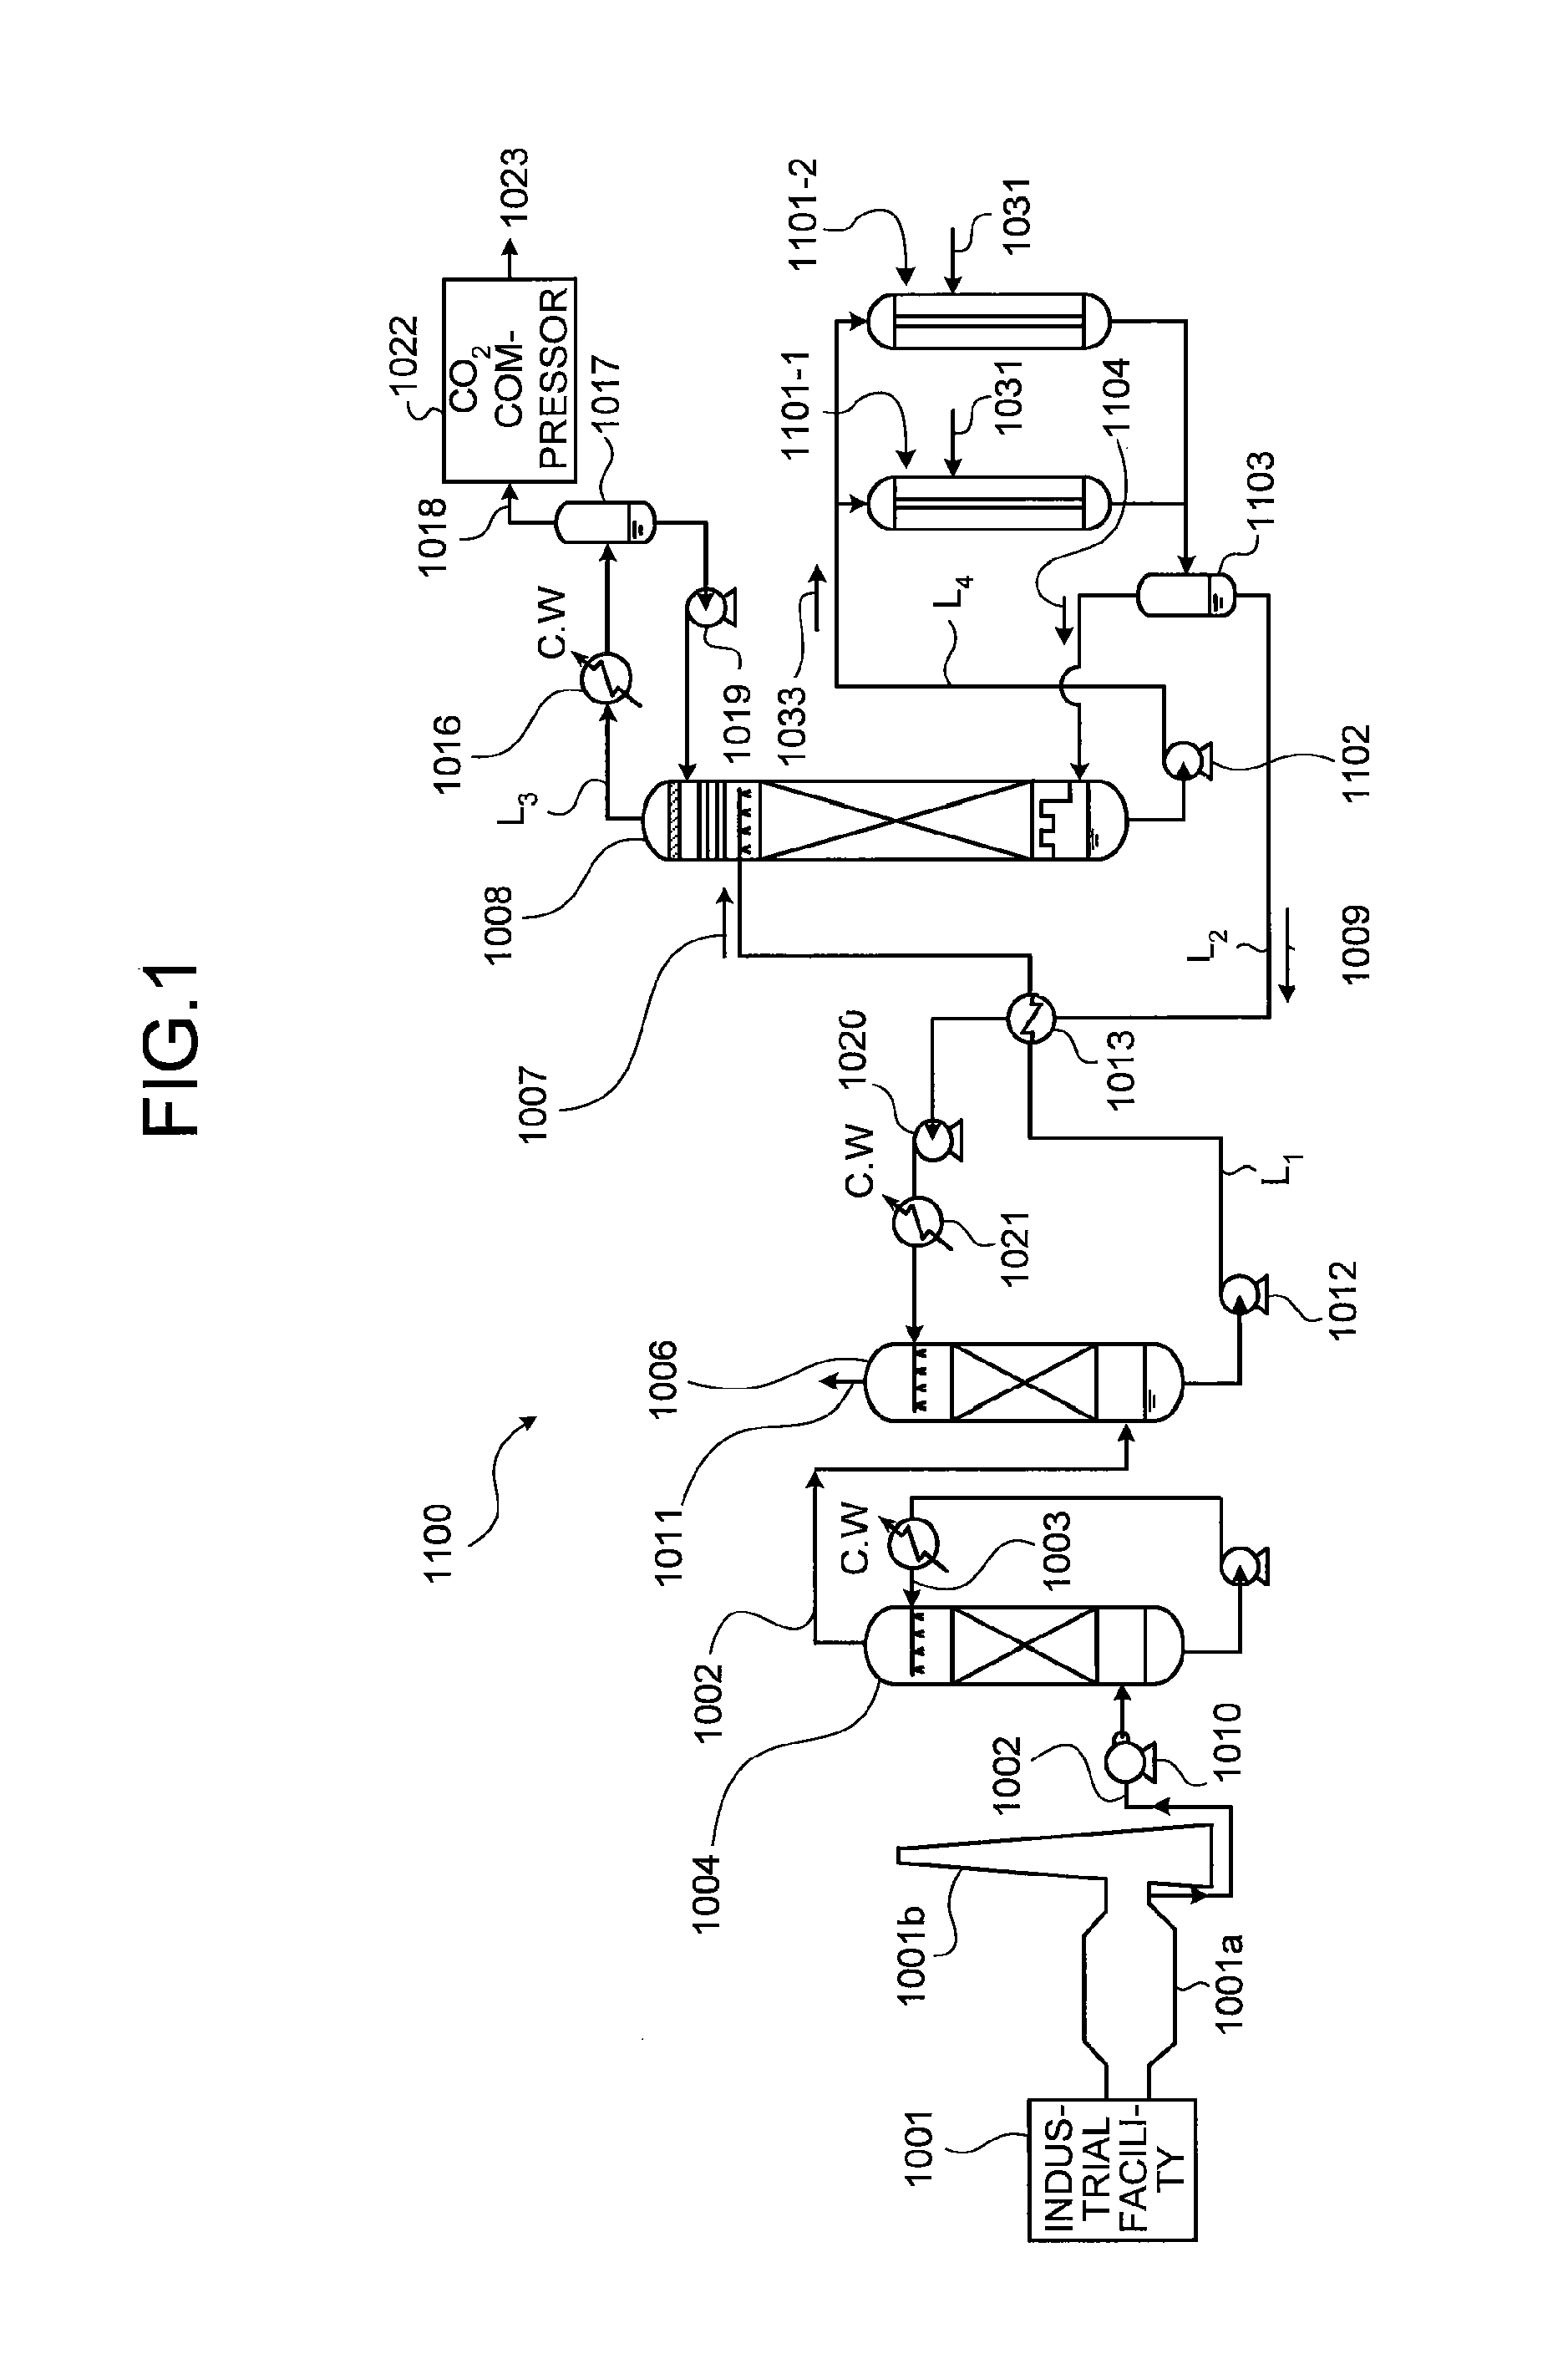 System for recovering carbon dioxide from flue gas